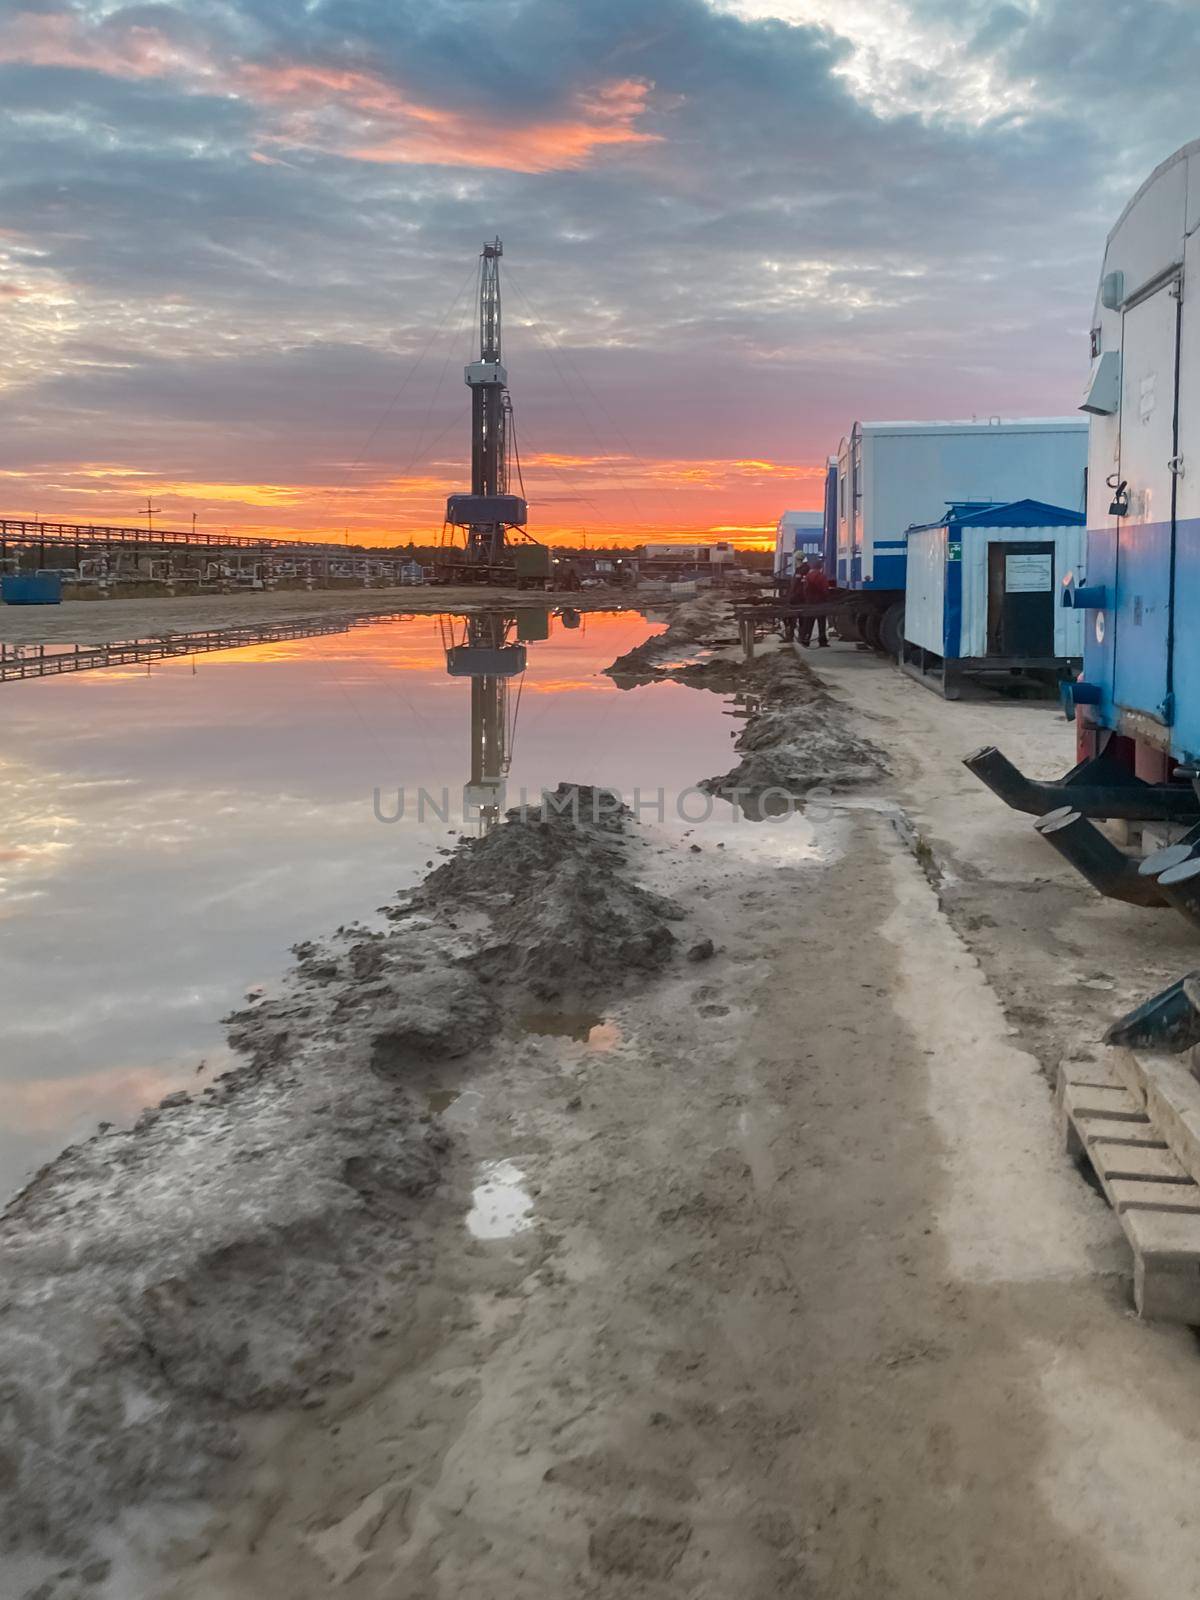 An oil field with an oil rig and wagons. Reflection in a puddle at sunset. Oil industry by levnat09